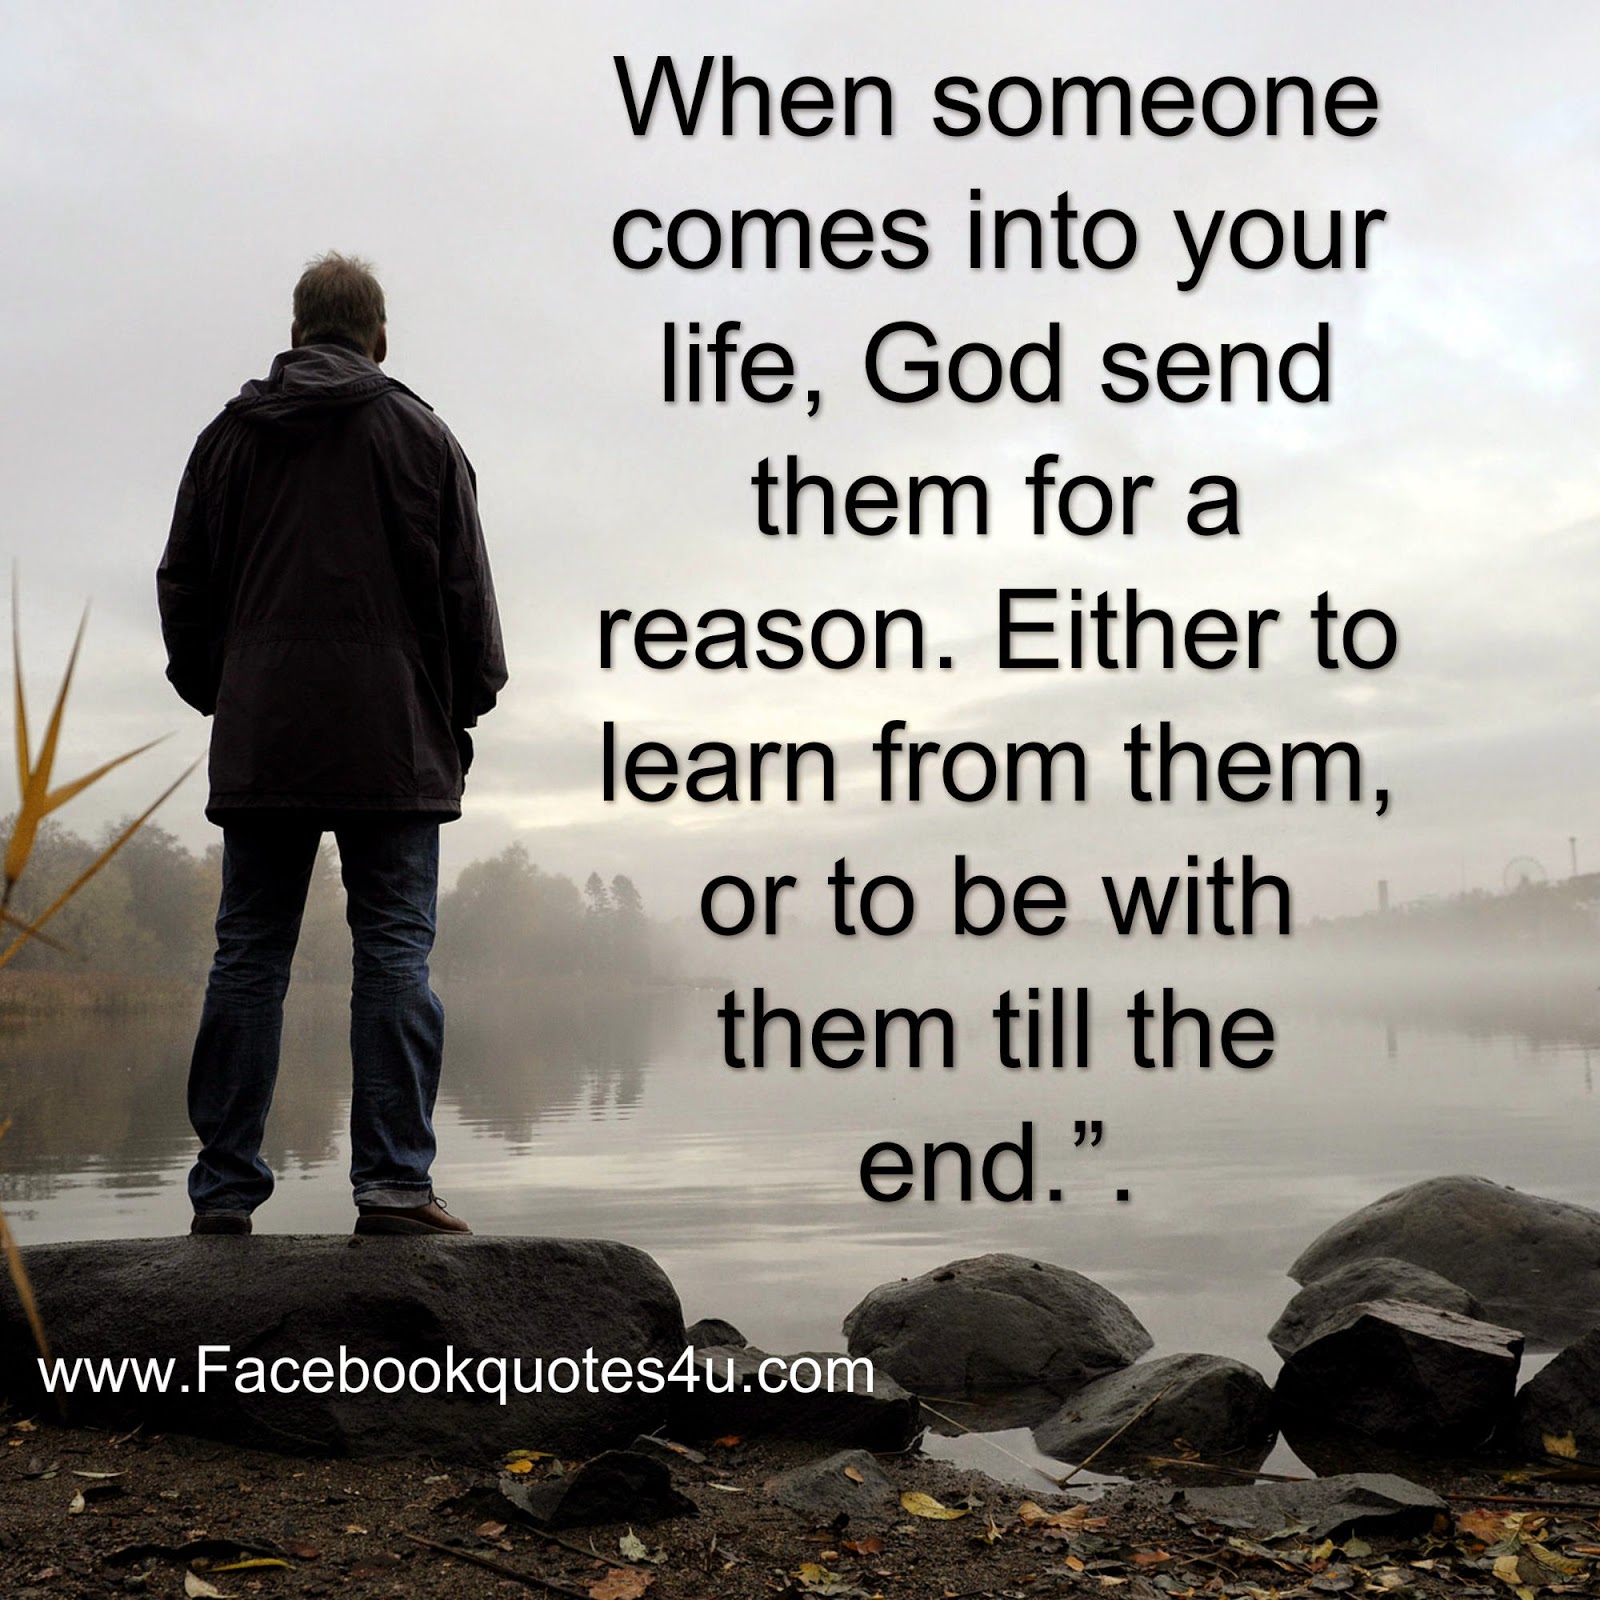 When someone es into your life God send them for a reason either to learn from them or to be with them till the end